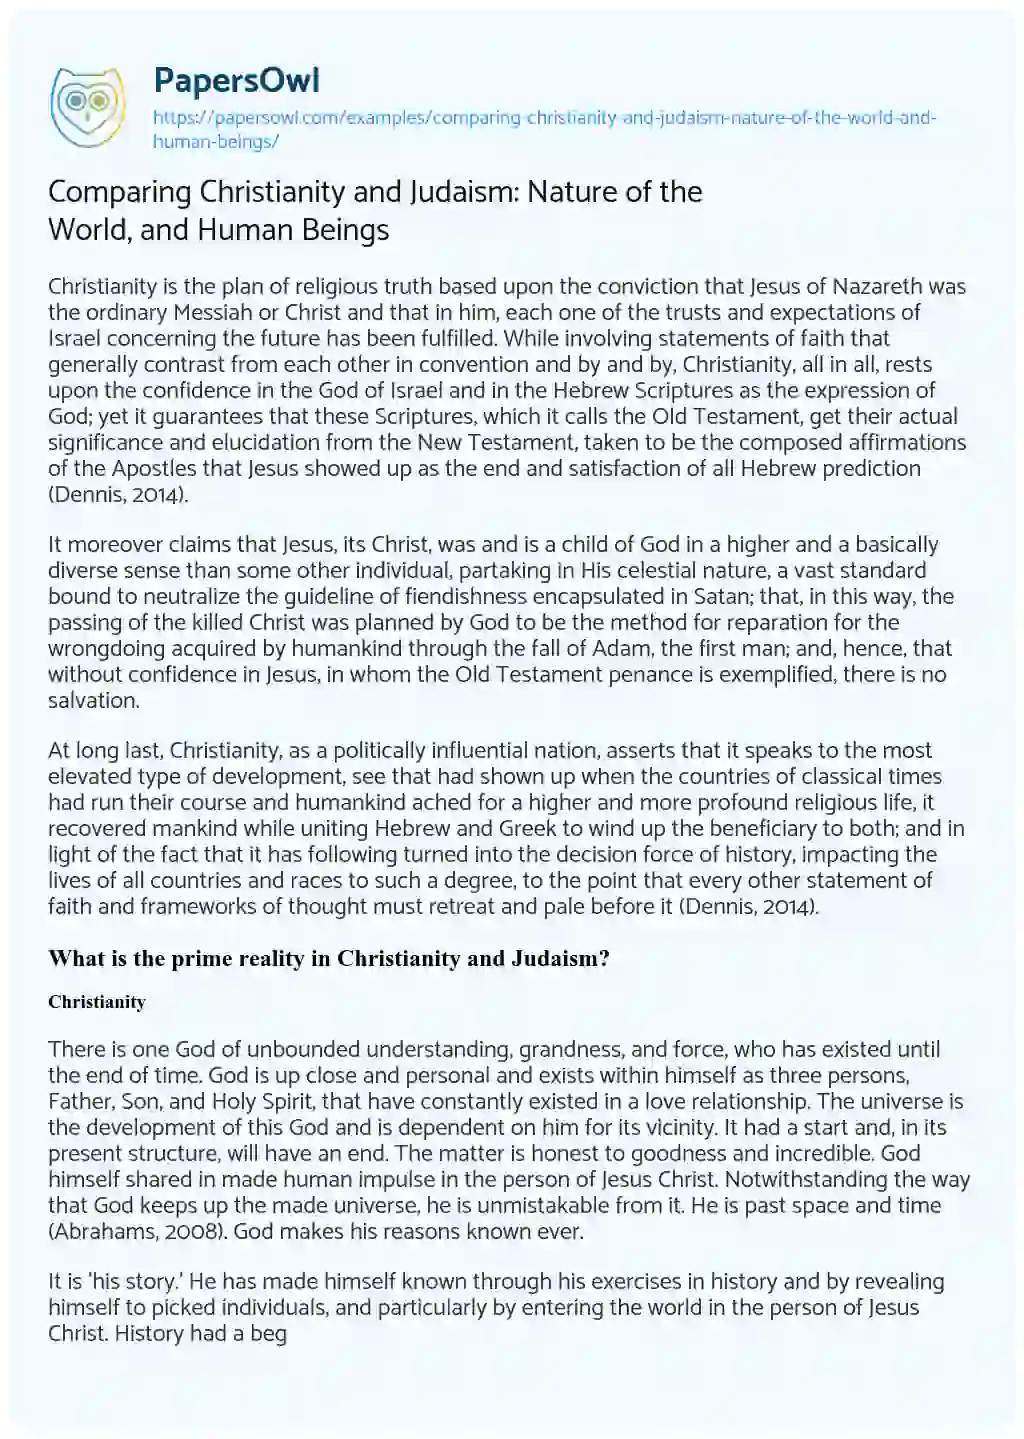 Essay on Comparing Christianity and Judaism: Nature of the World, and Human Beings